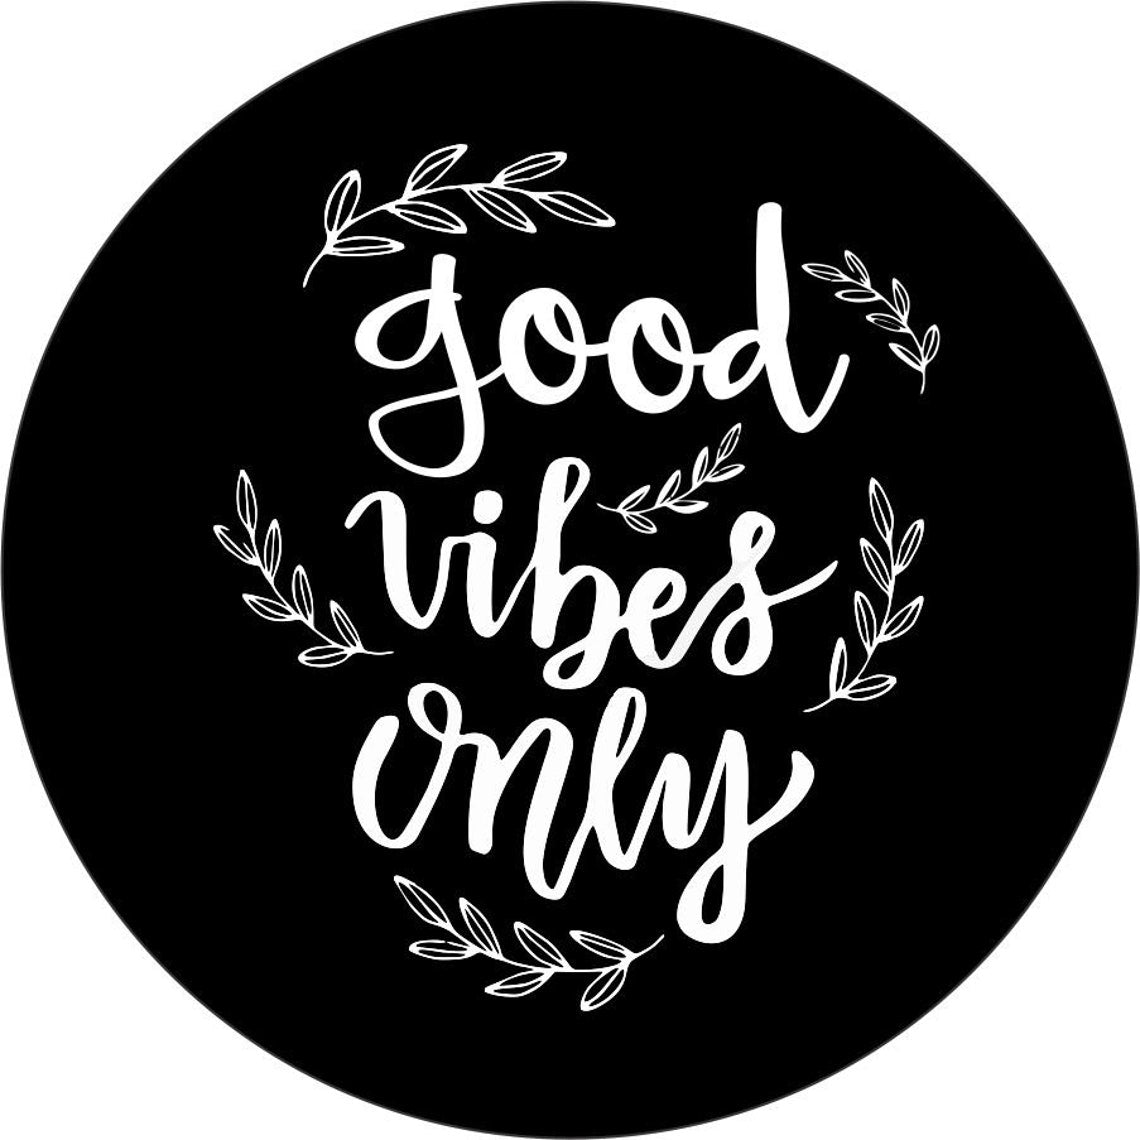 Good vibes only quote with leafy decorations around on black spare tire cover design